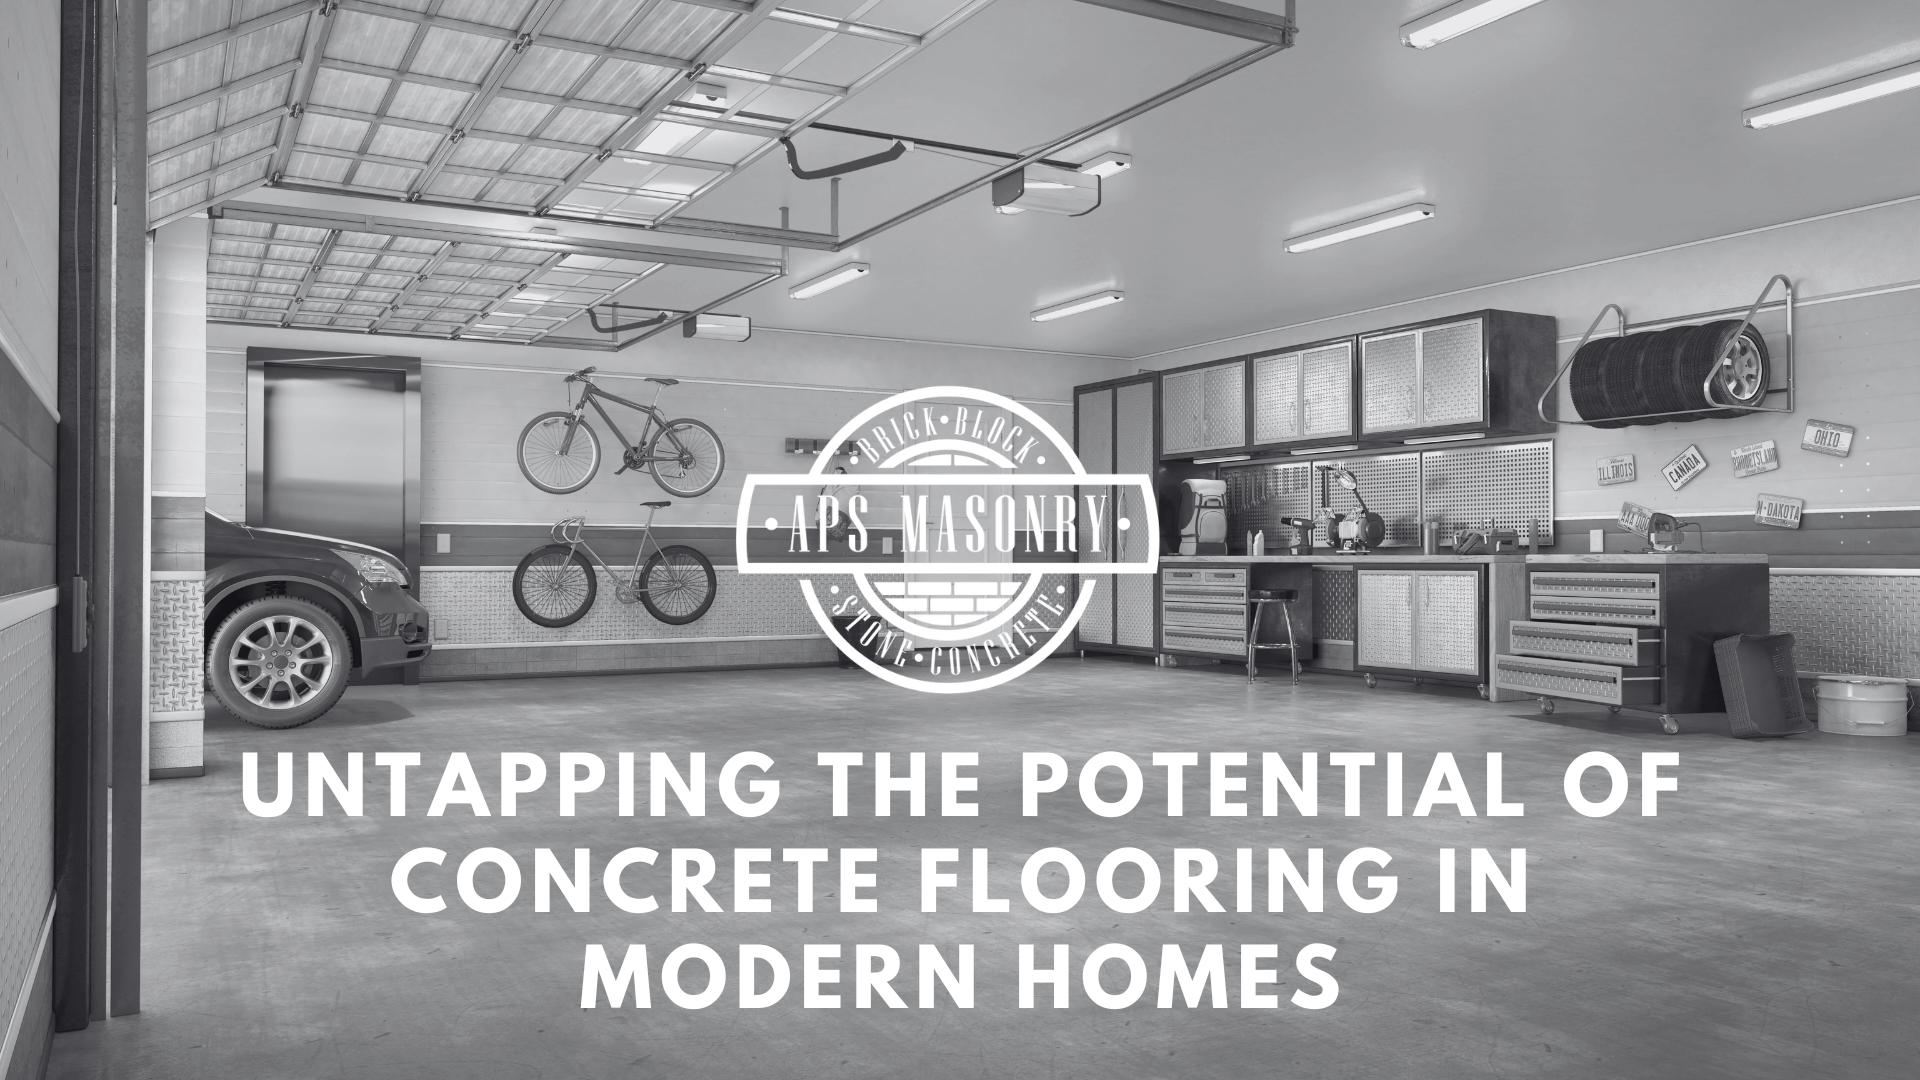 Untapping the Potential of Concrete Flooring in Modern Homes